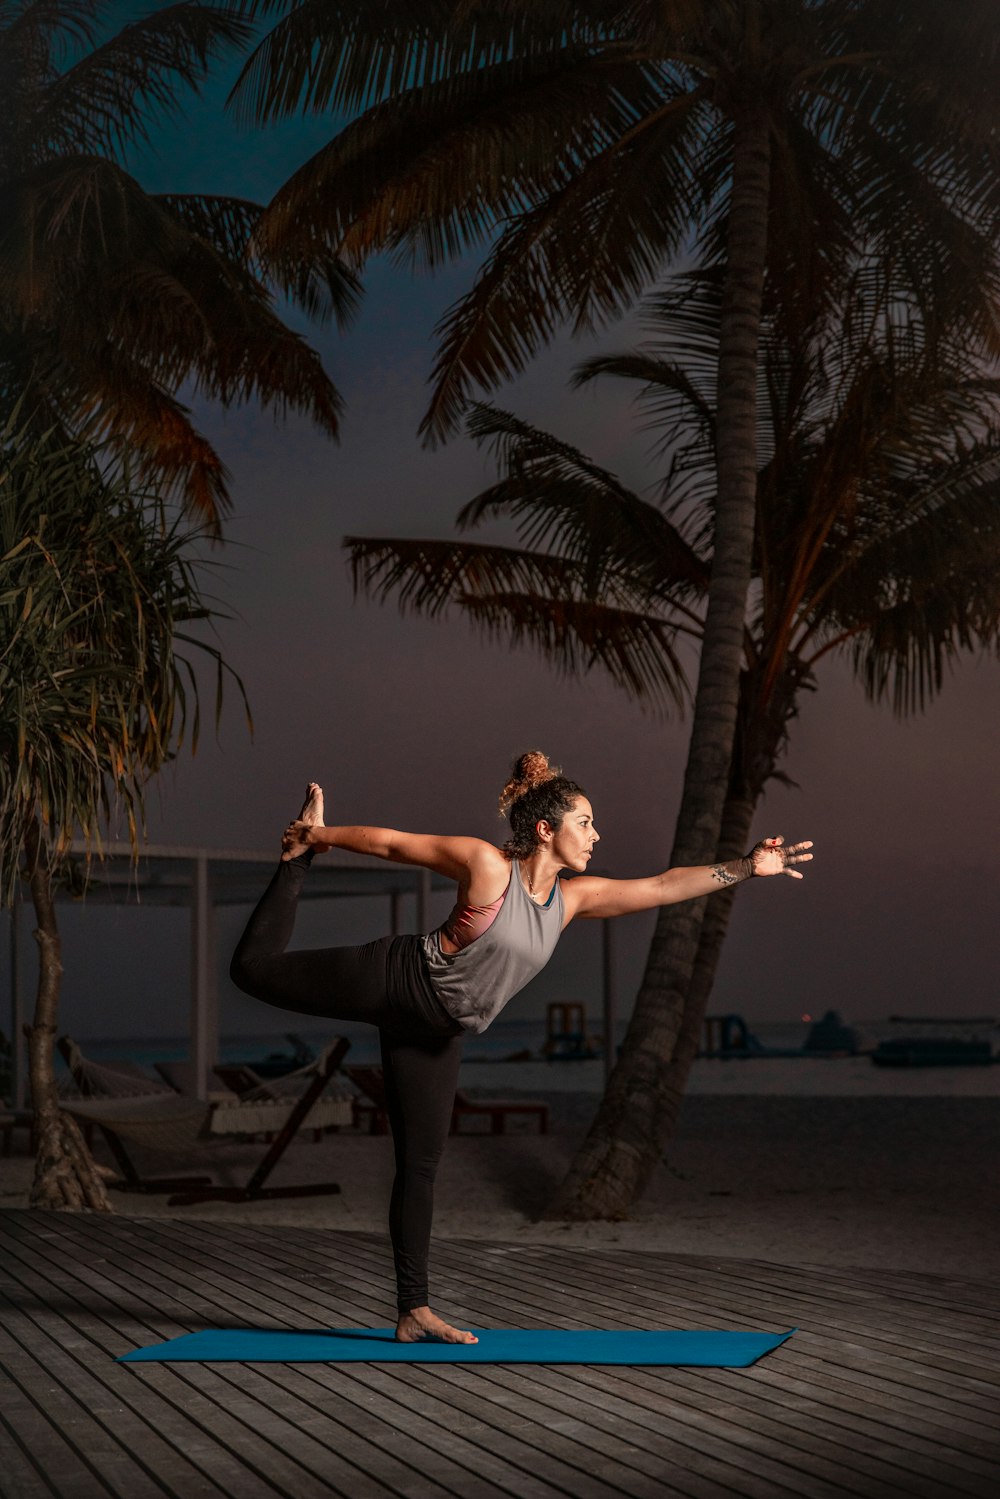 a woman doing yoga on a mat in front of palm trees